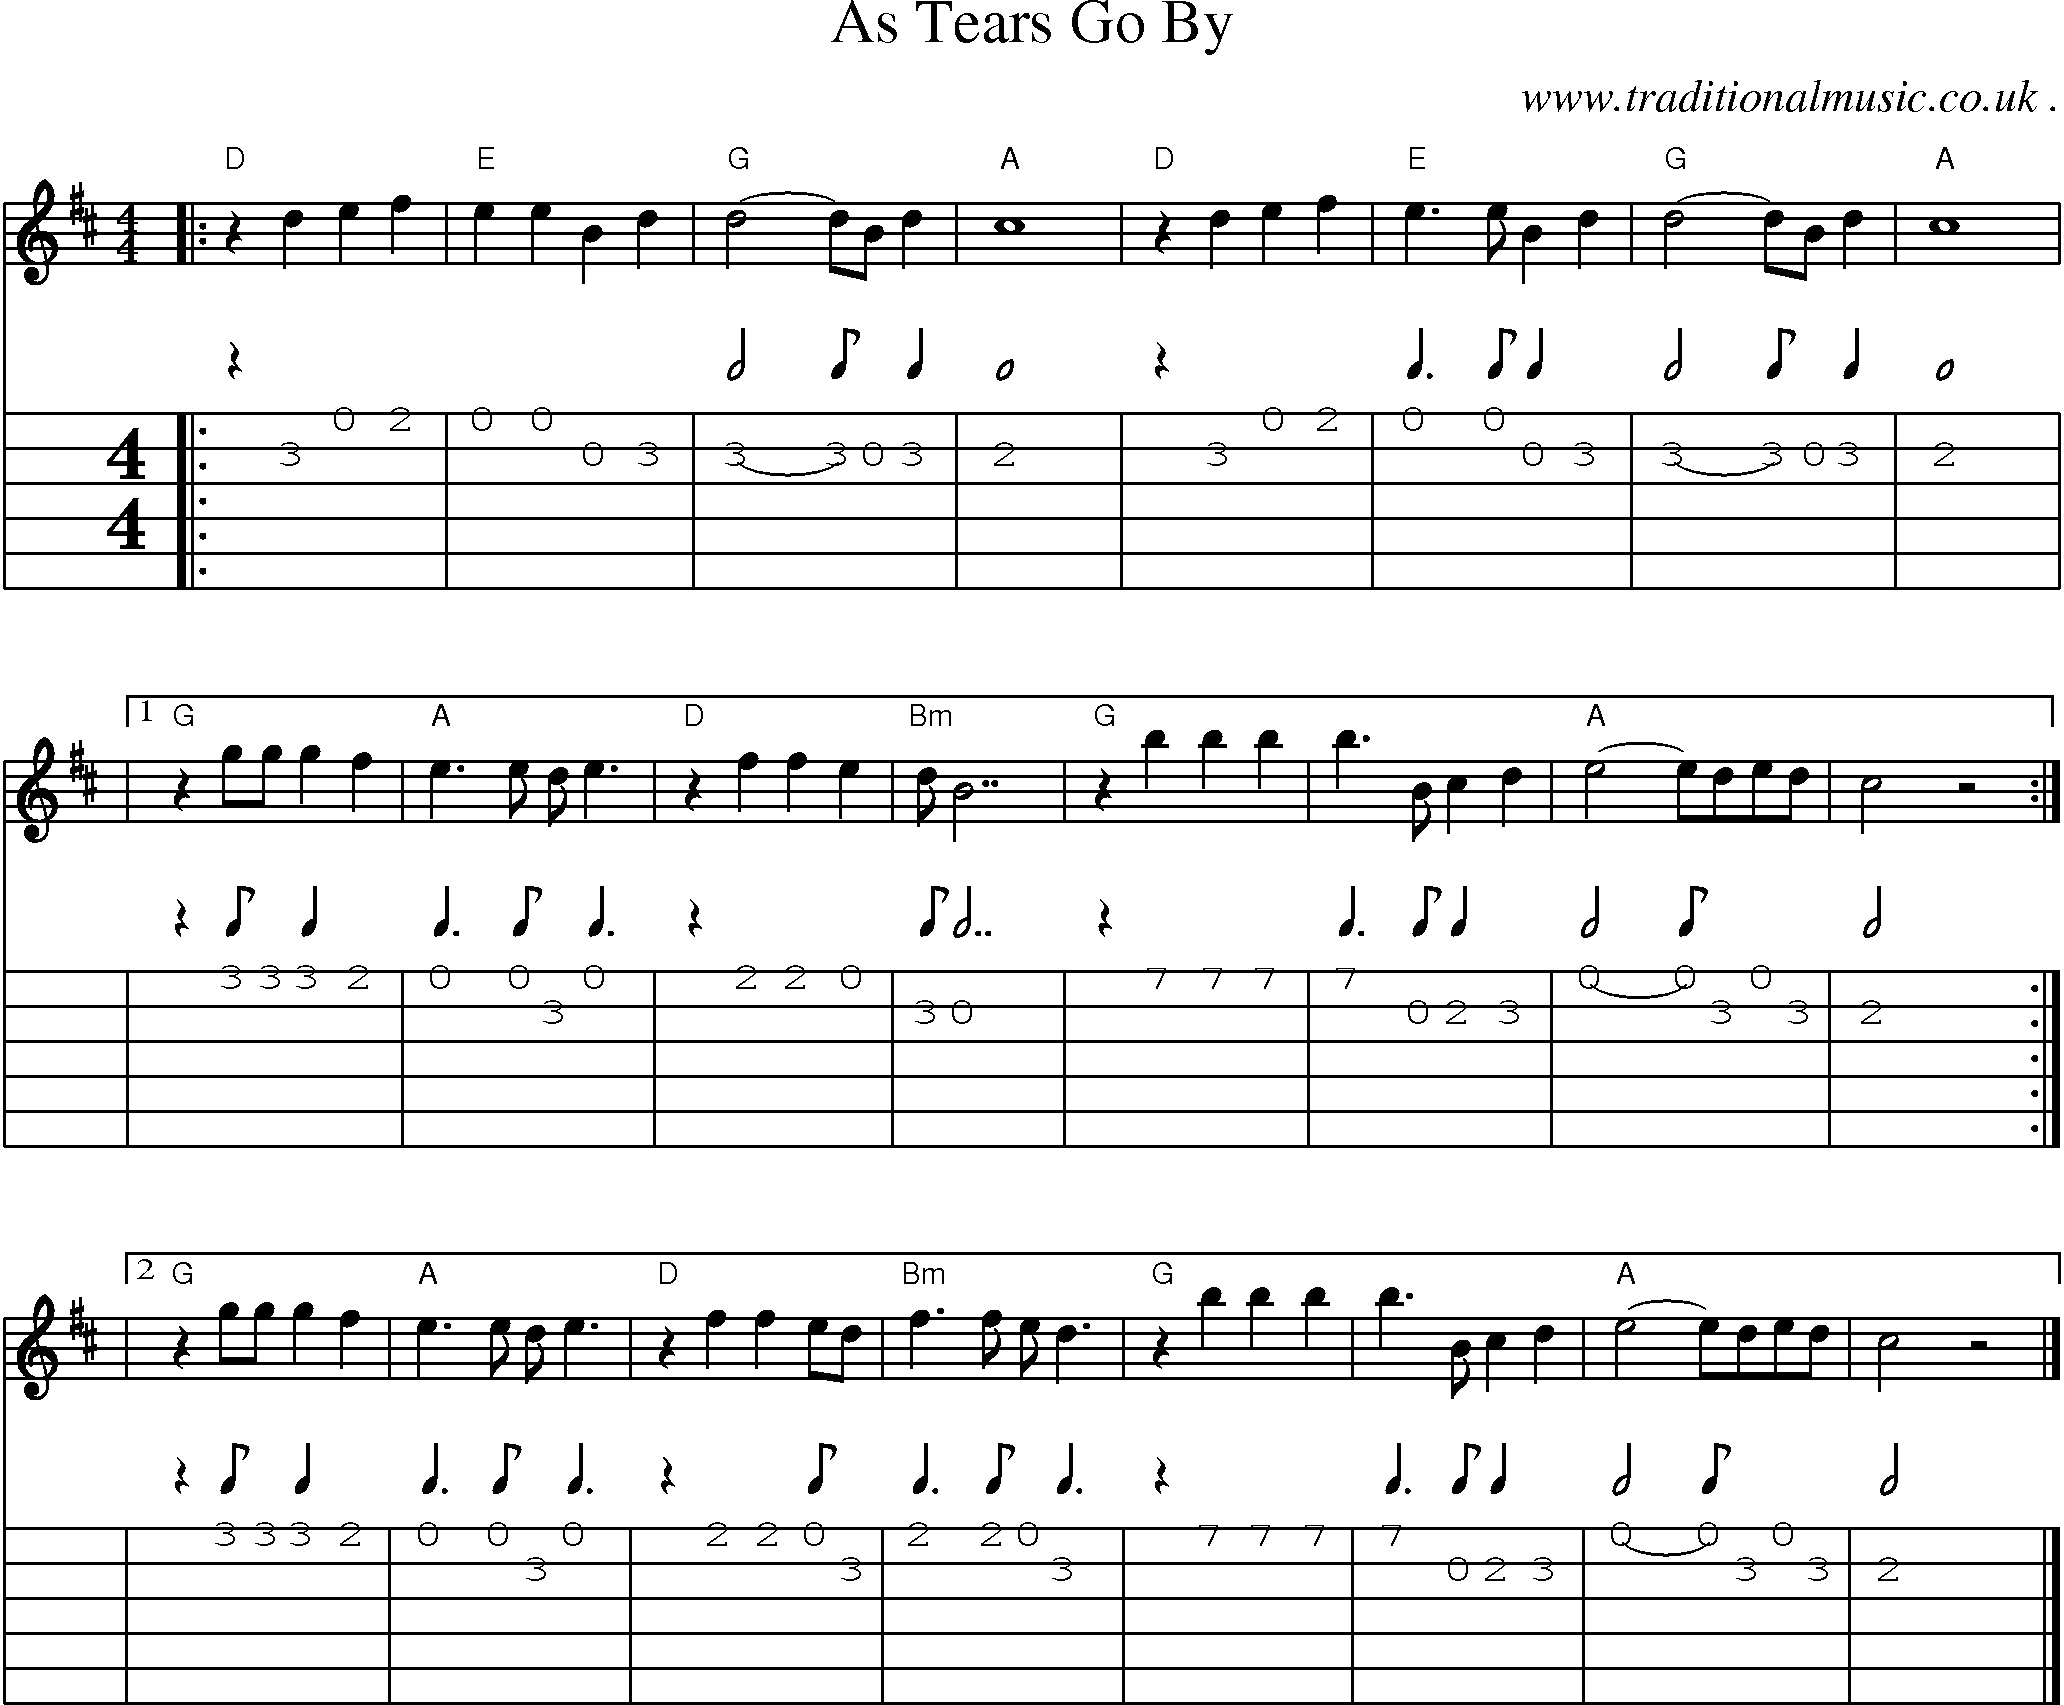 Sheet-music  score, Chords and Guitar Tabs for As Tears Go By